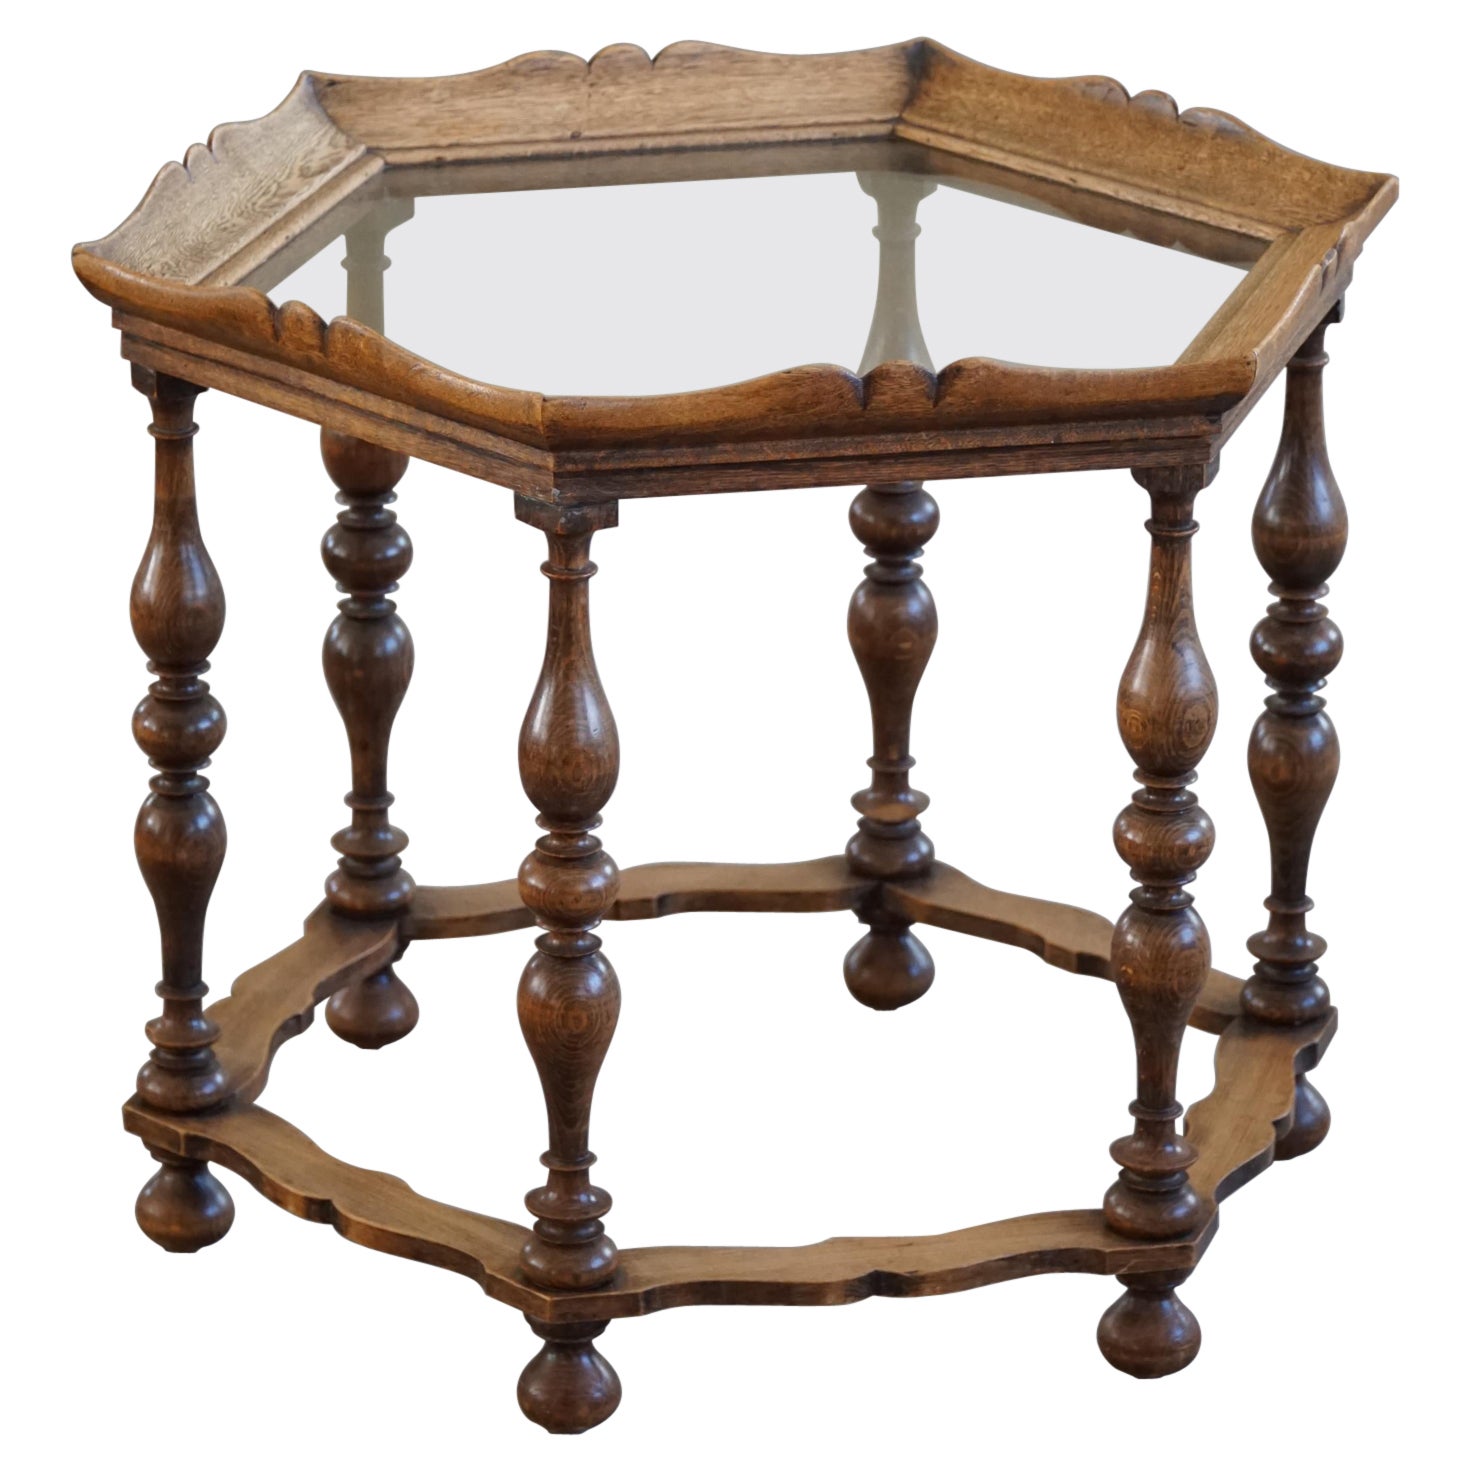 Sculptural Baroque Style Hexagon Side Table, By a Danish Cabinetmaker, 1930s For Sale